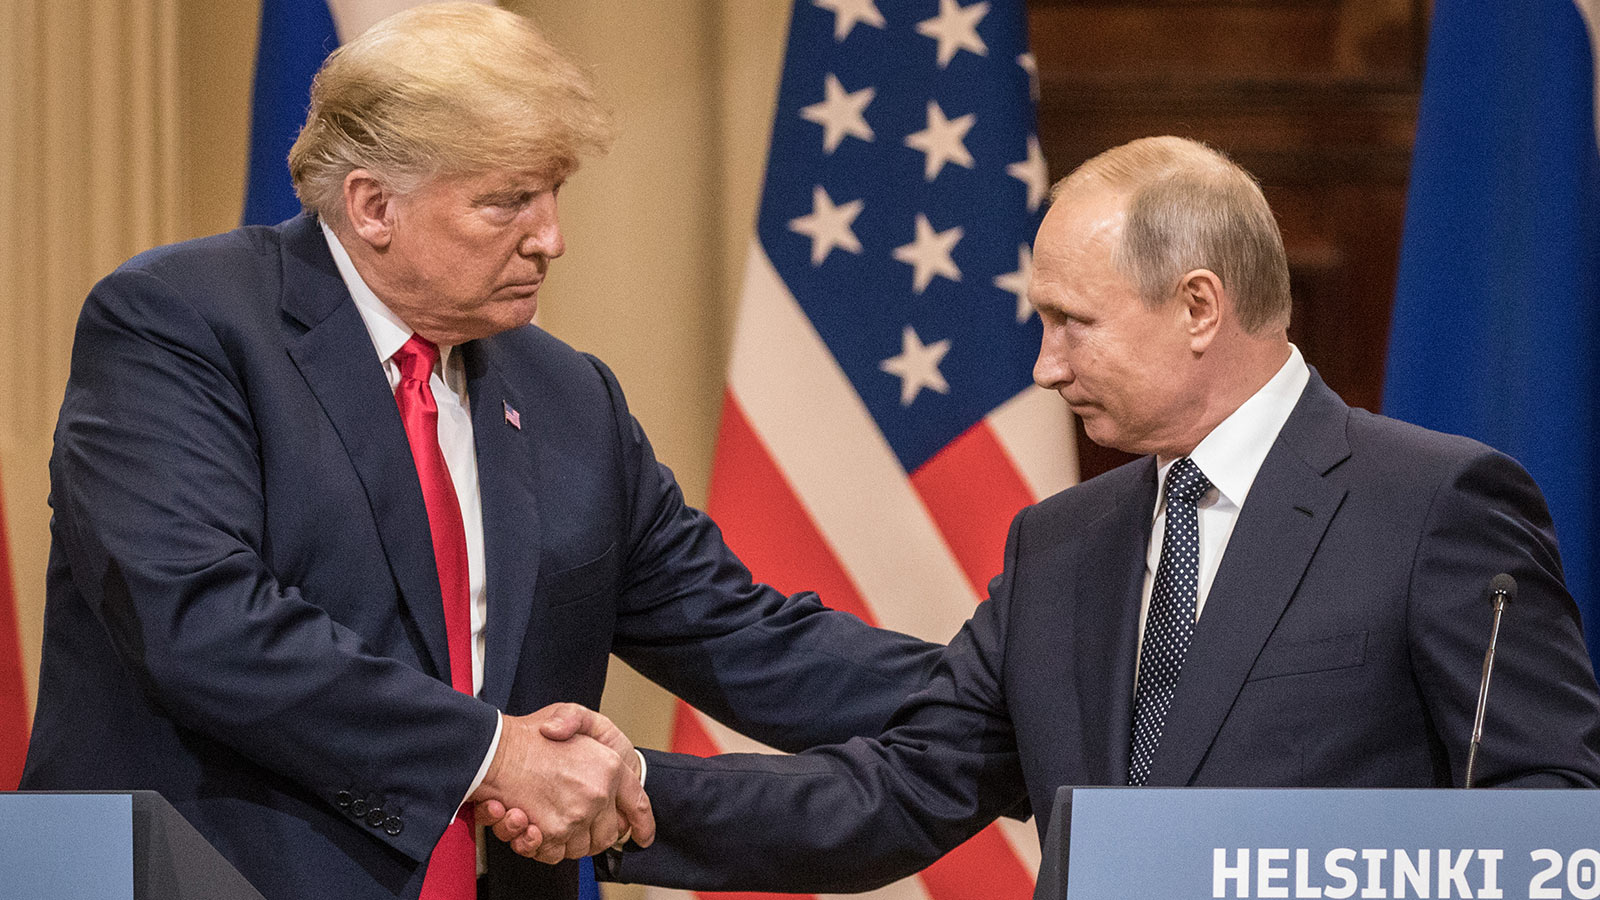 U.S. President Donald Trump (L) and Russian President Vladimir Putin shake hands during a joint press conference after their summit on July 16, 2018 in Helsinki, Finland.